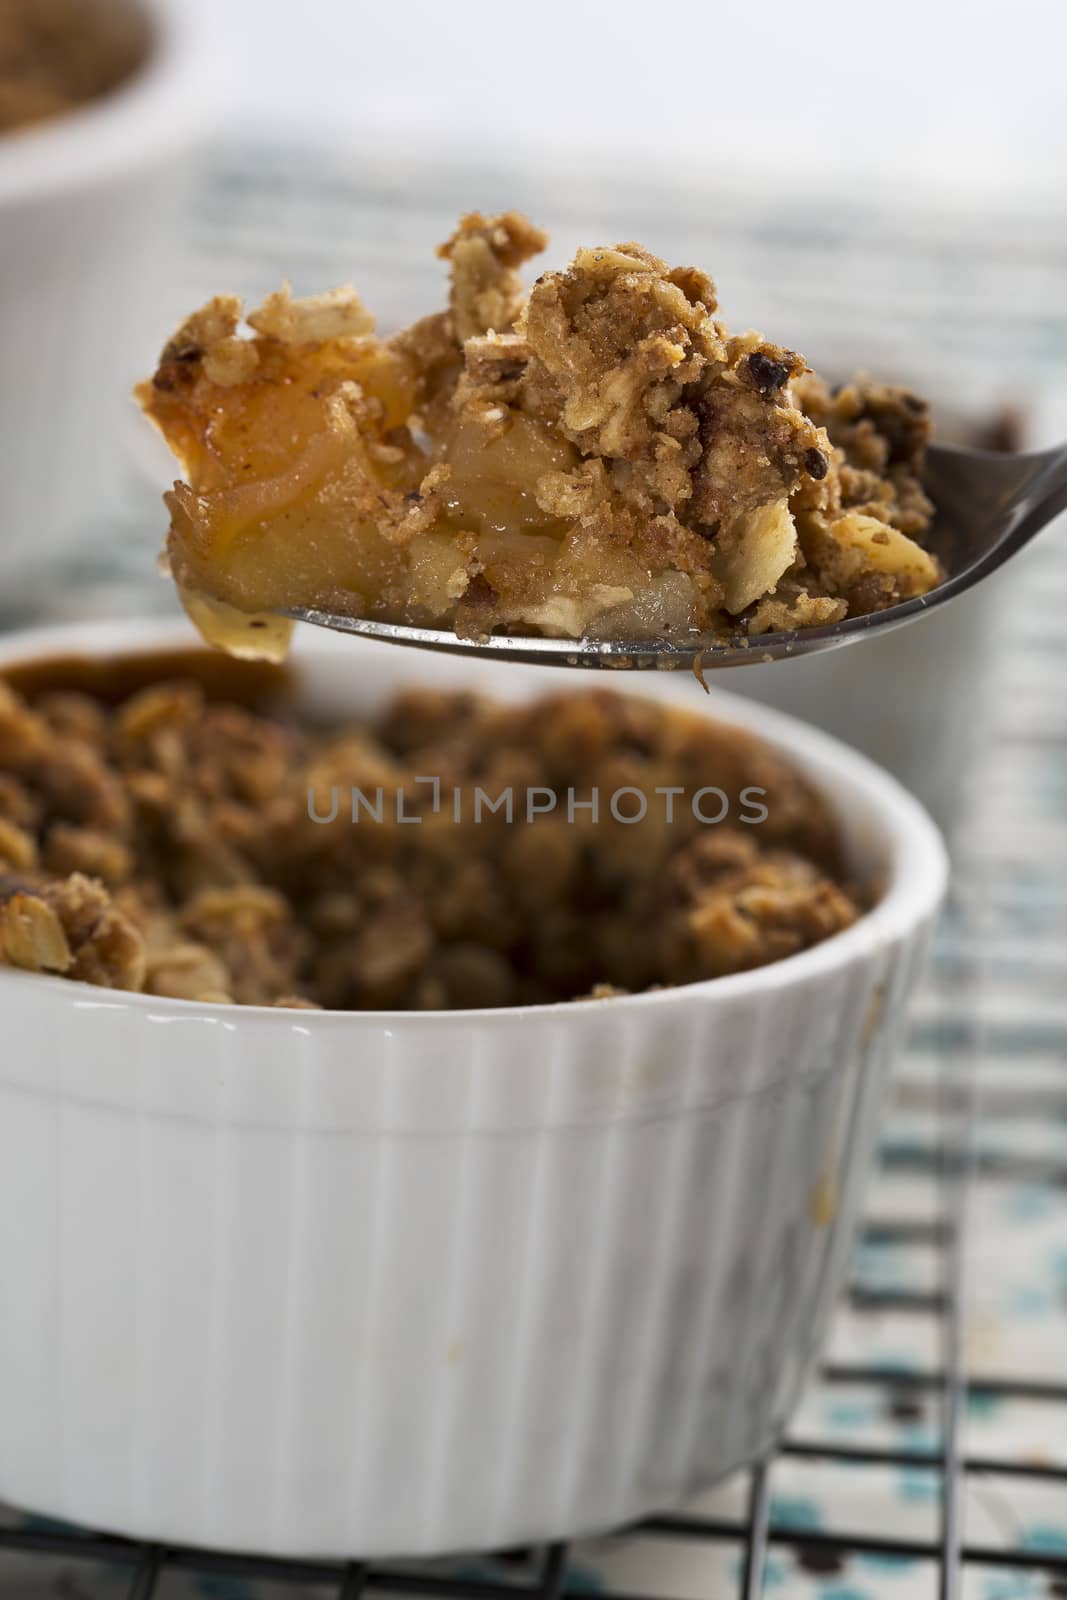 Spoon full of fresh apple crumble from single serving